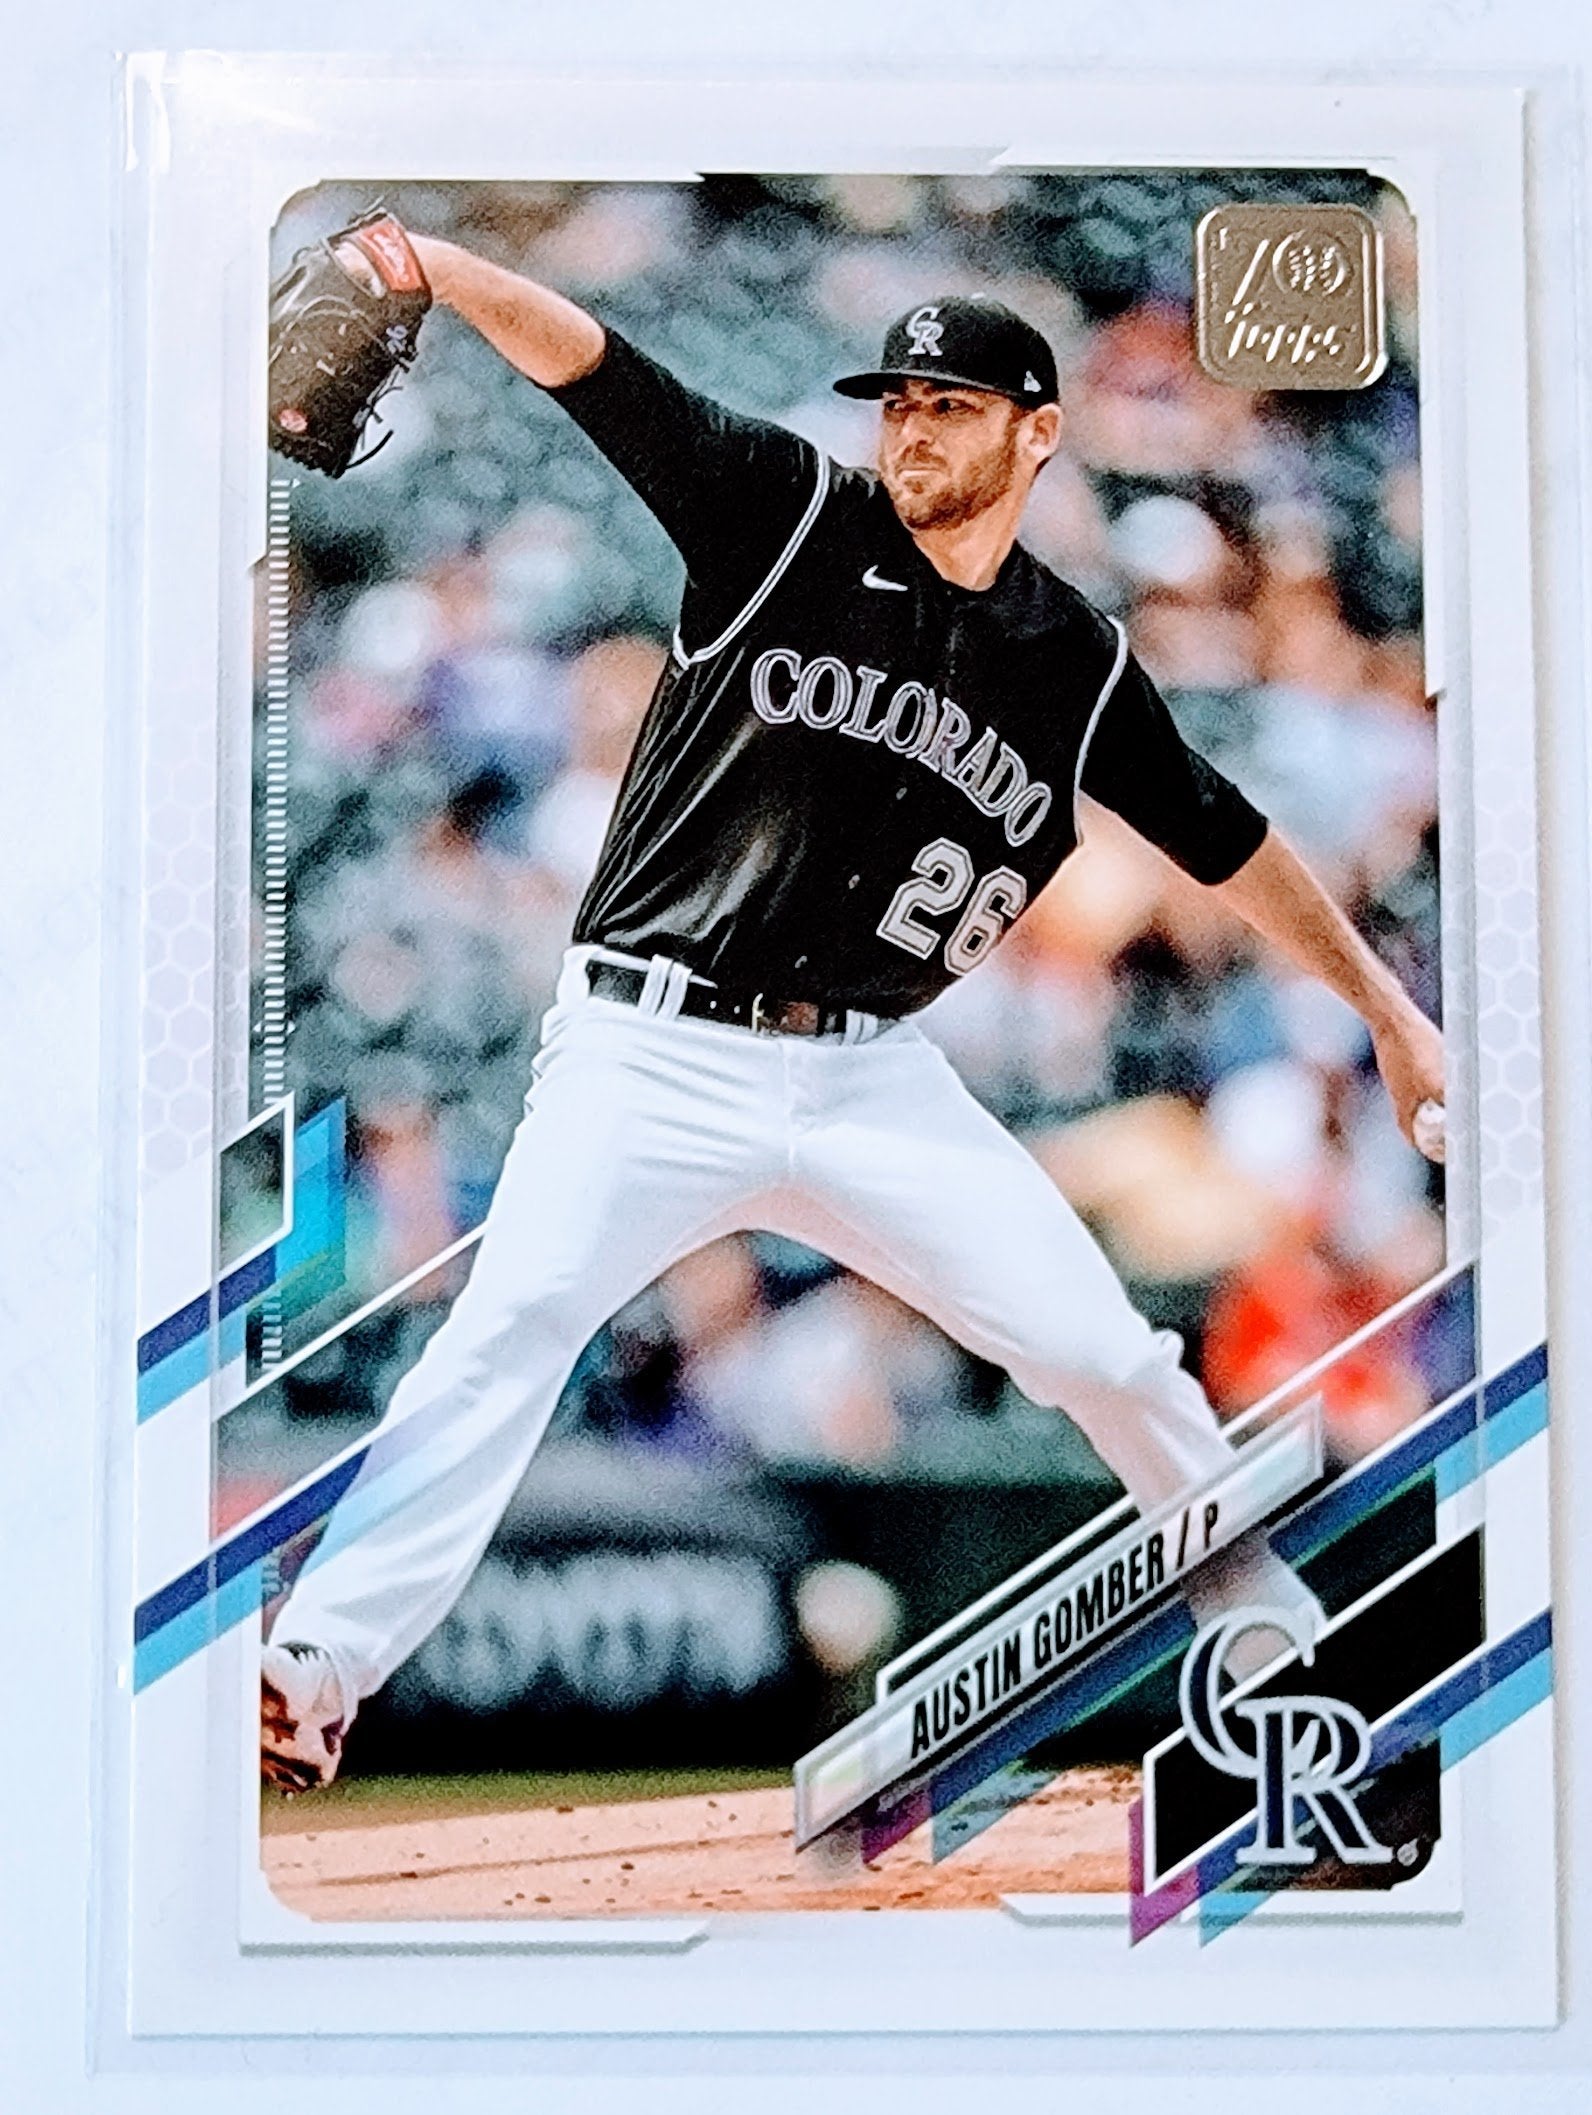 2021 Topps Update Austin Gomer Baseball Trading Card SMCB1 simple Xclusive Collectibles   